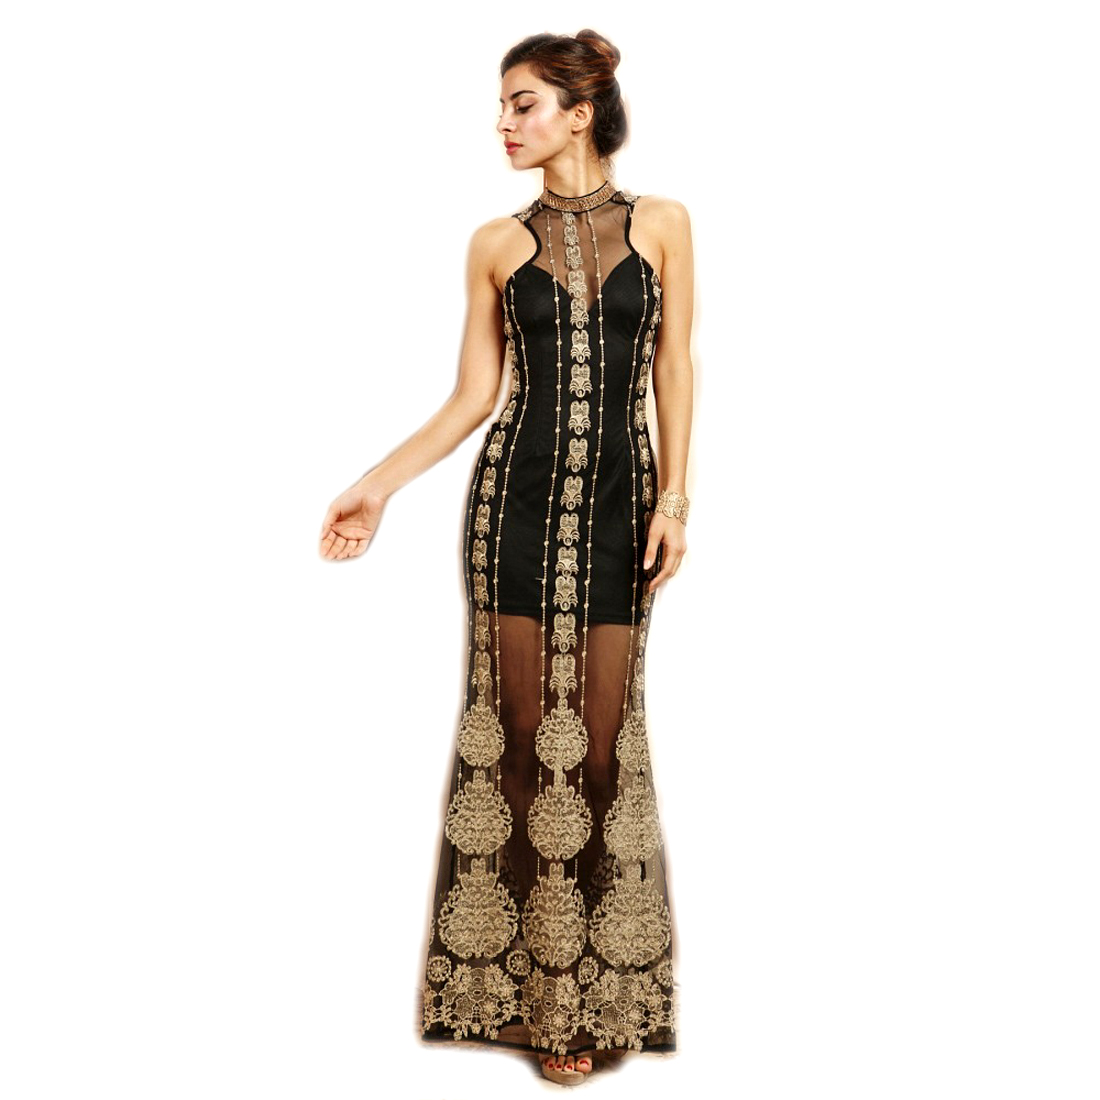 Soieblu, Black and Gold Sleveless Statuesque Formal High Neck Choker Maxi Dress, Large - image 1 of 3